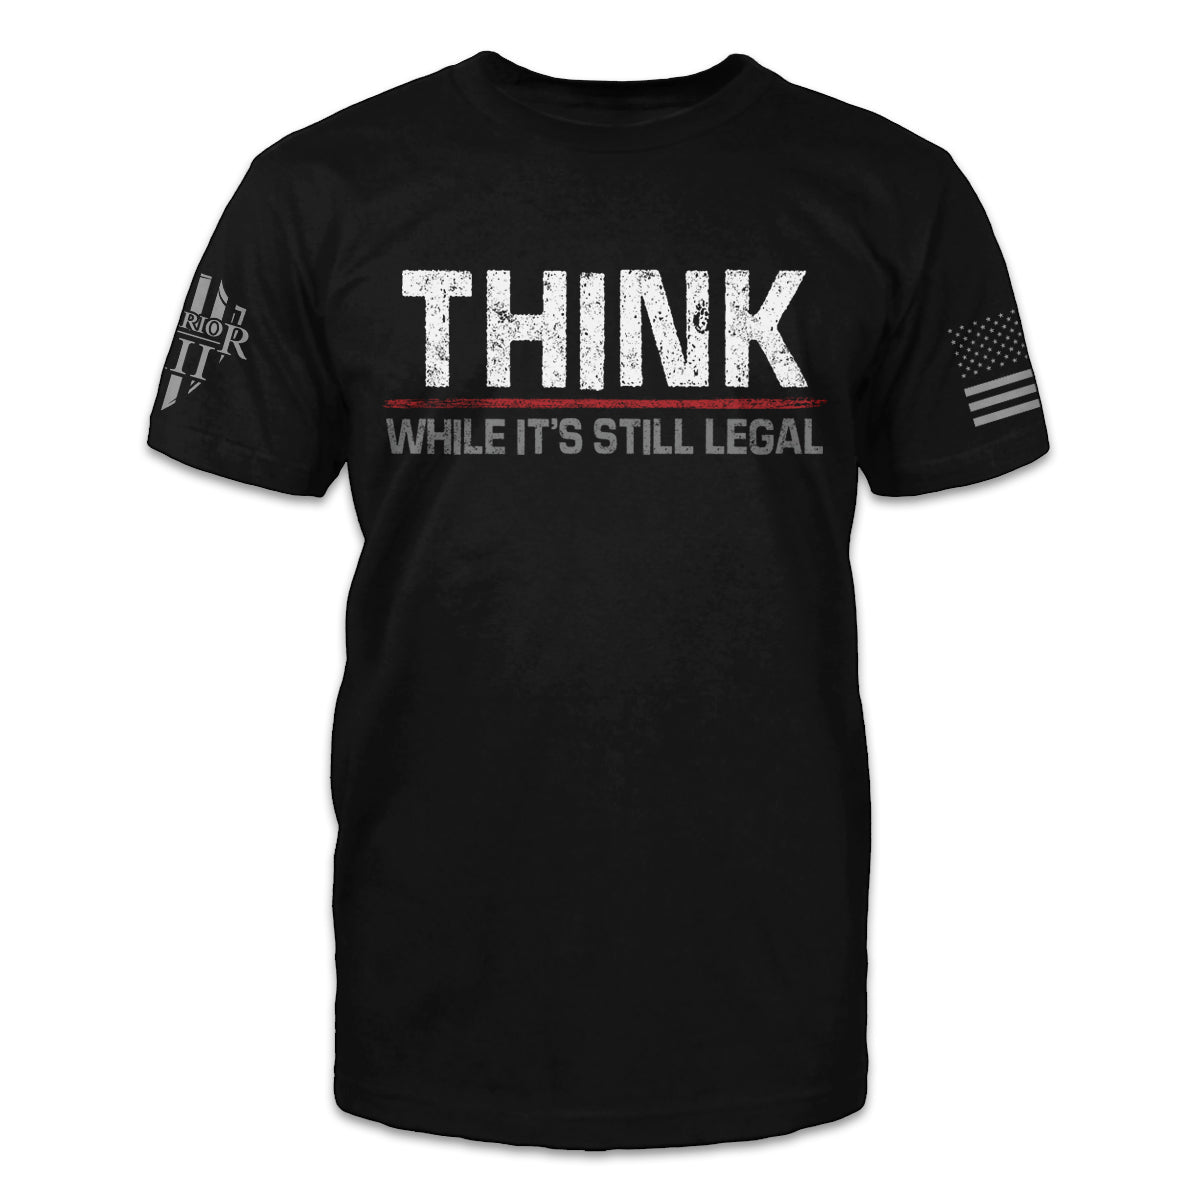 Think While It's Still Legal - Warrior 12 - A Patriotic Apparel Company